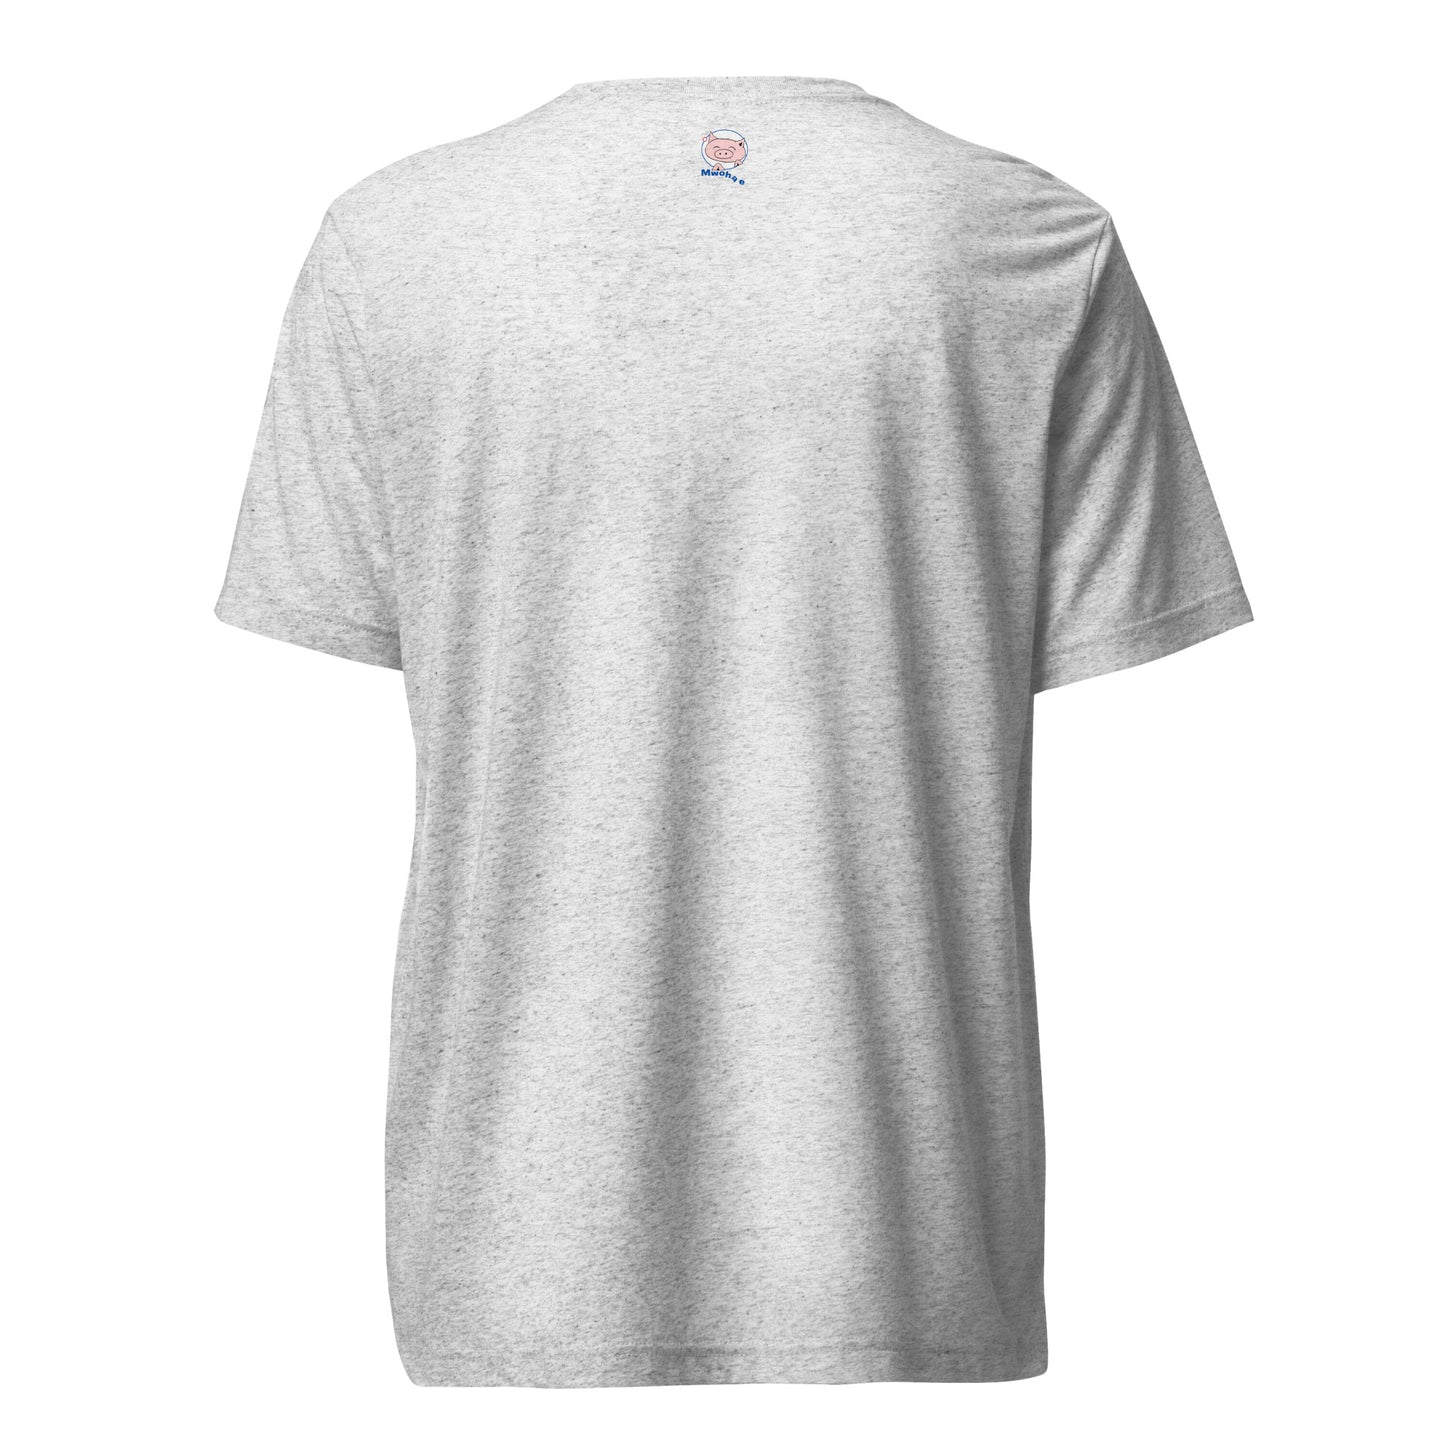 Fleck white T-shirt with small Mwohae logo on the back